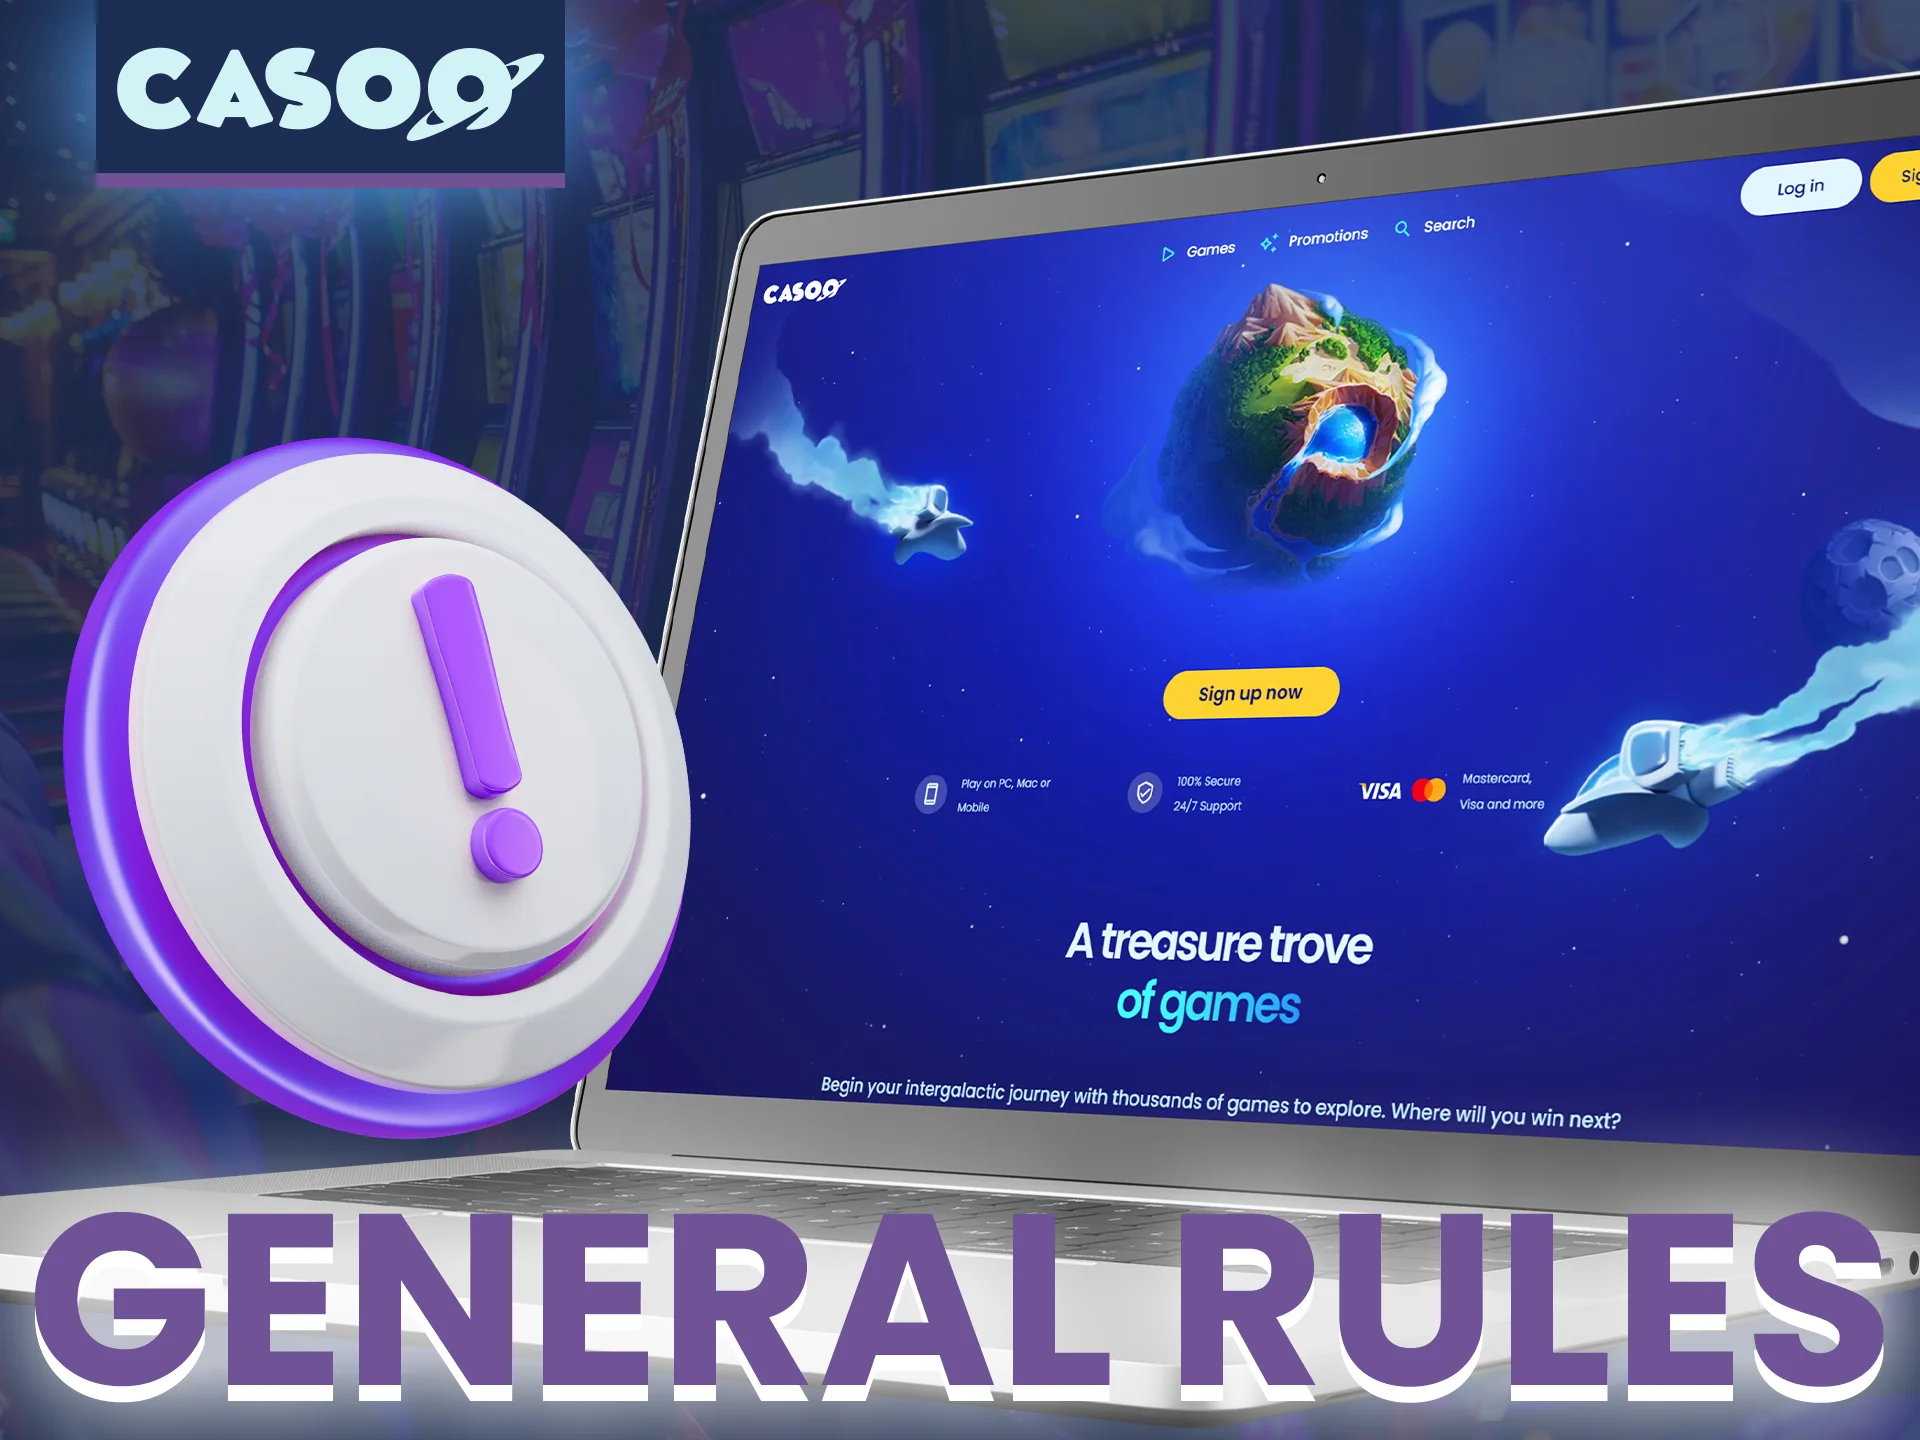 Follow these rules when creating an account at Casoo Casino.